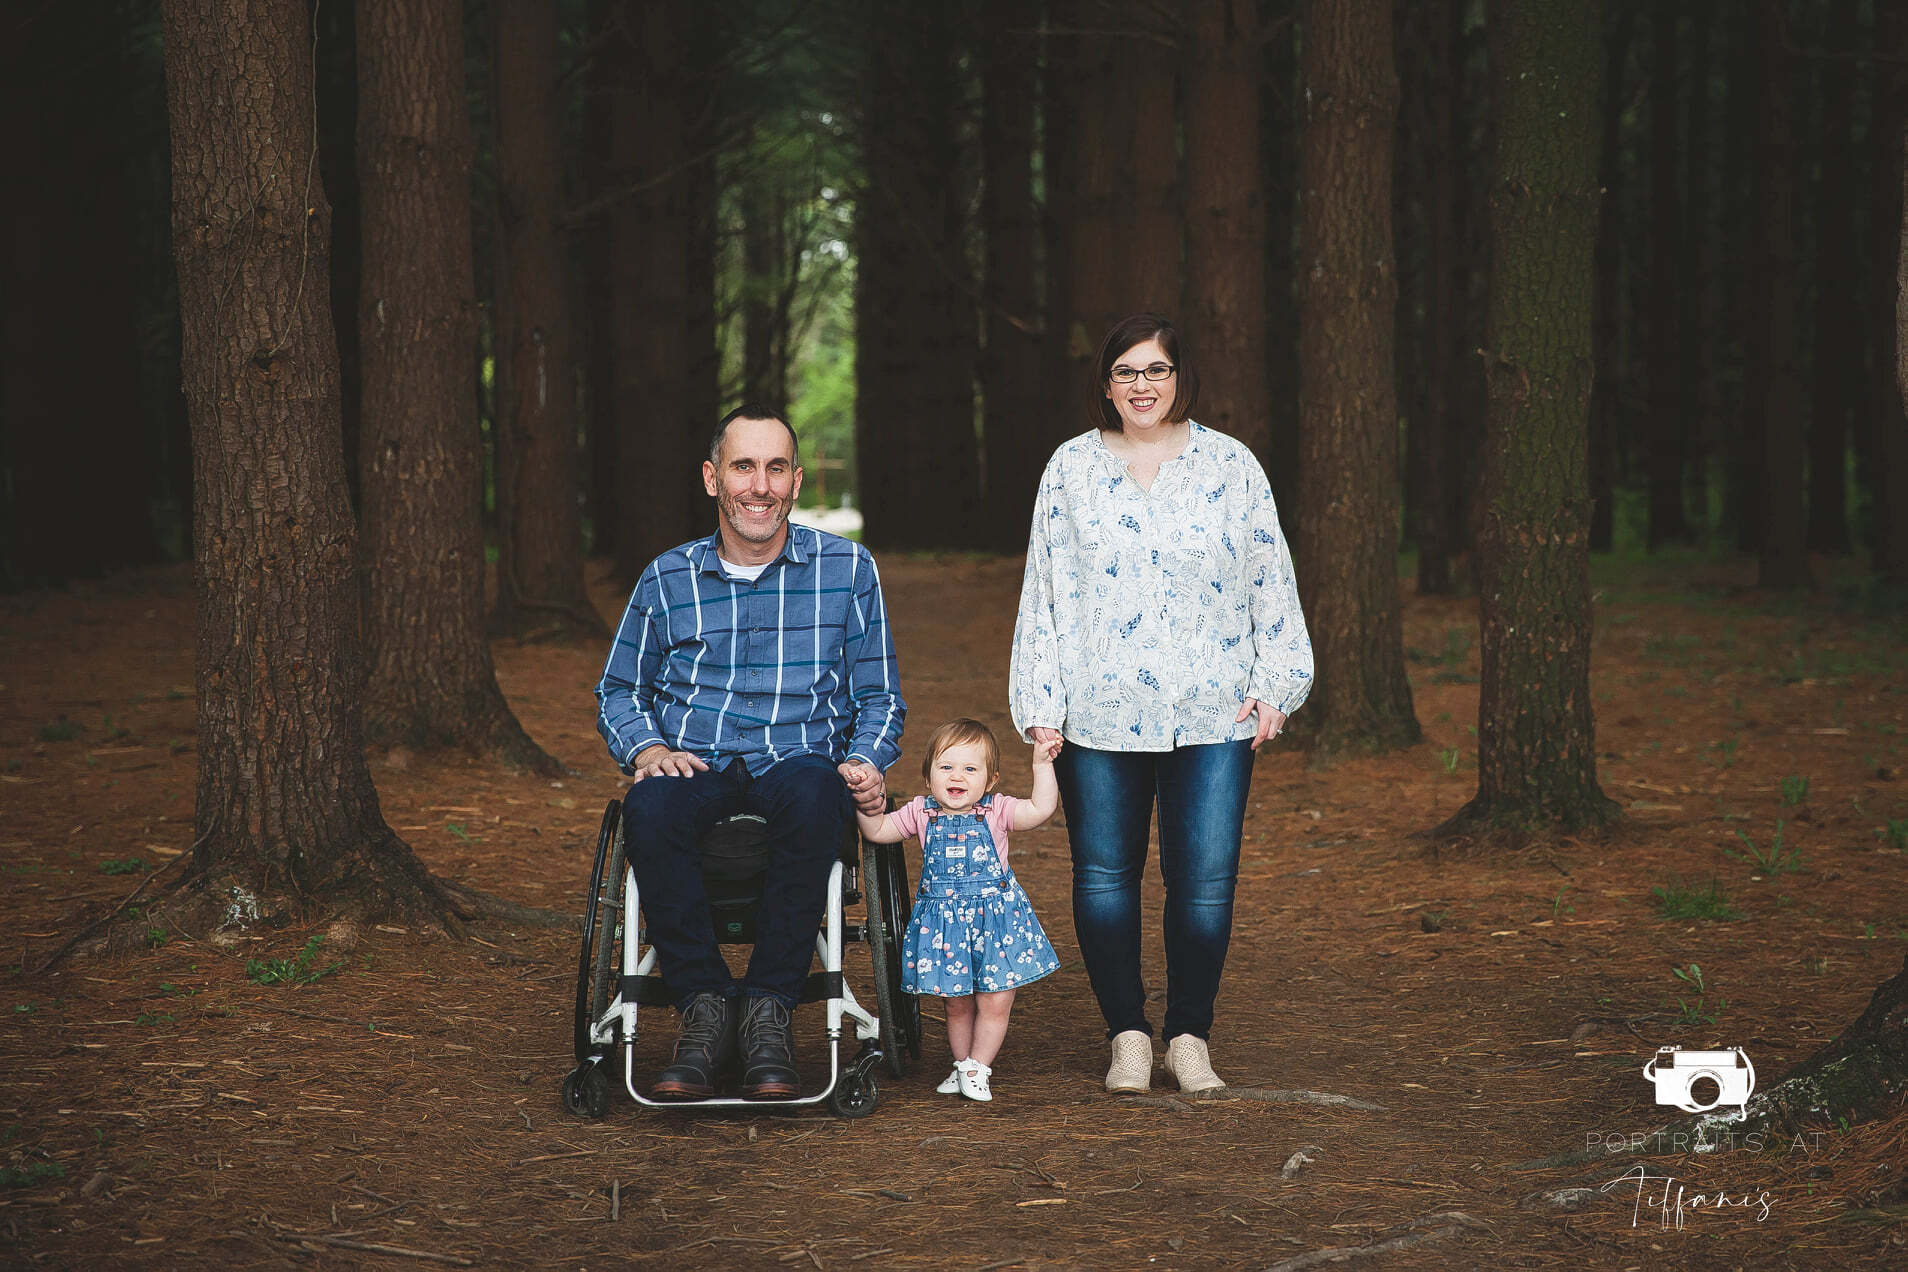 Matt Striet, in the wheelchair at left, with his wife (far right) and one-year-old daughter between them